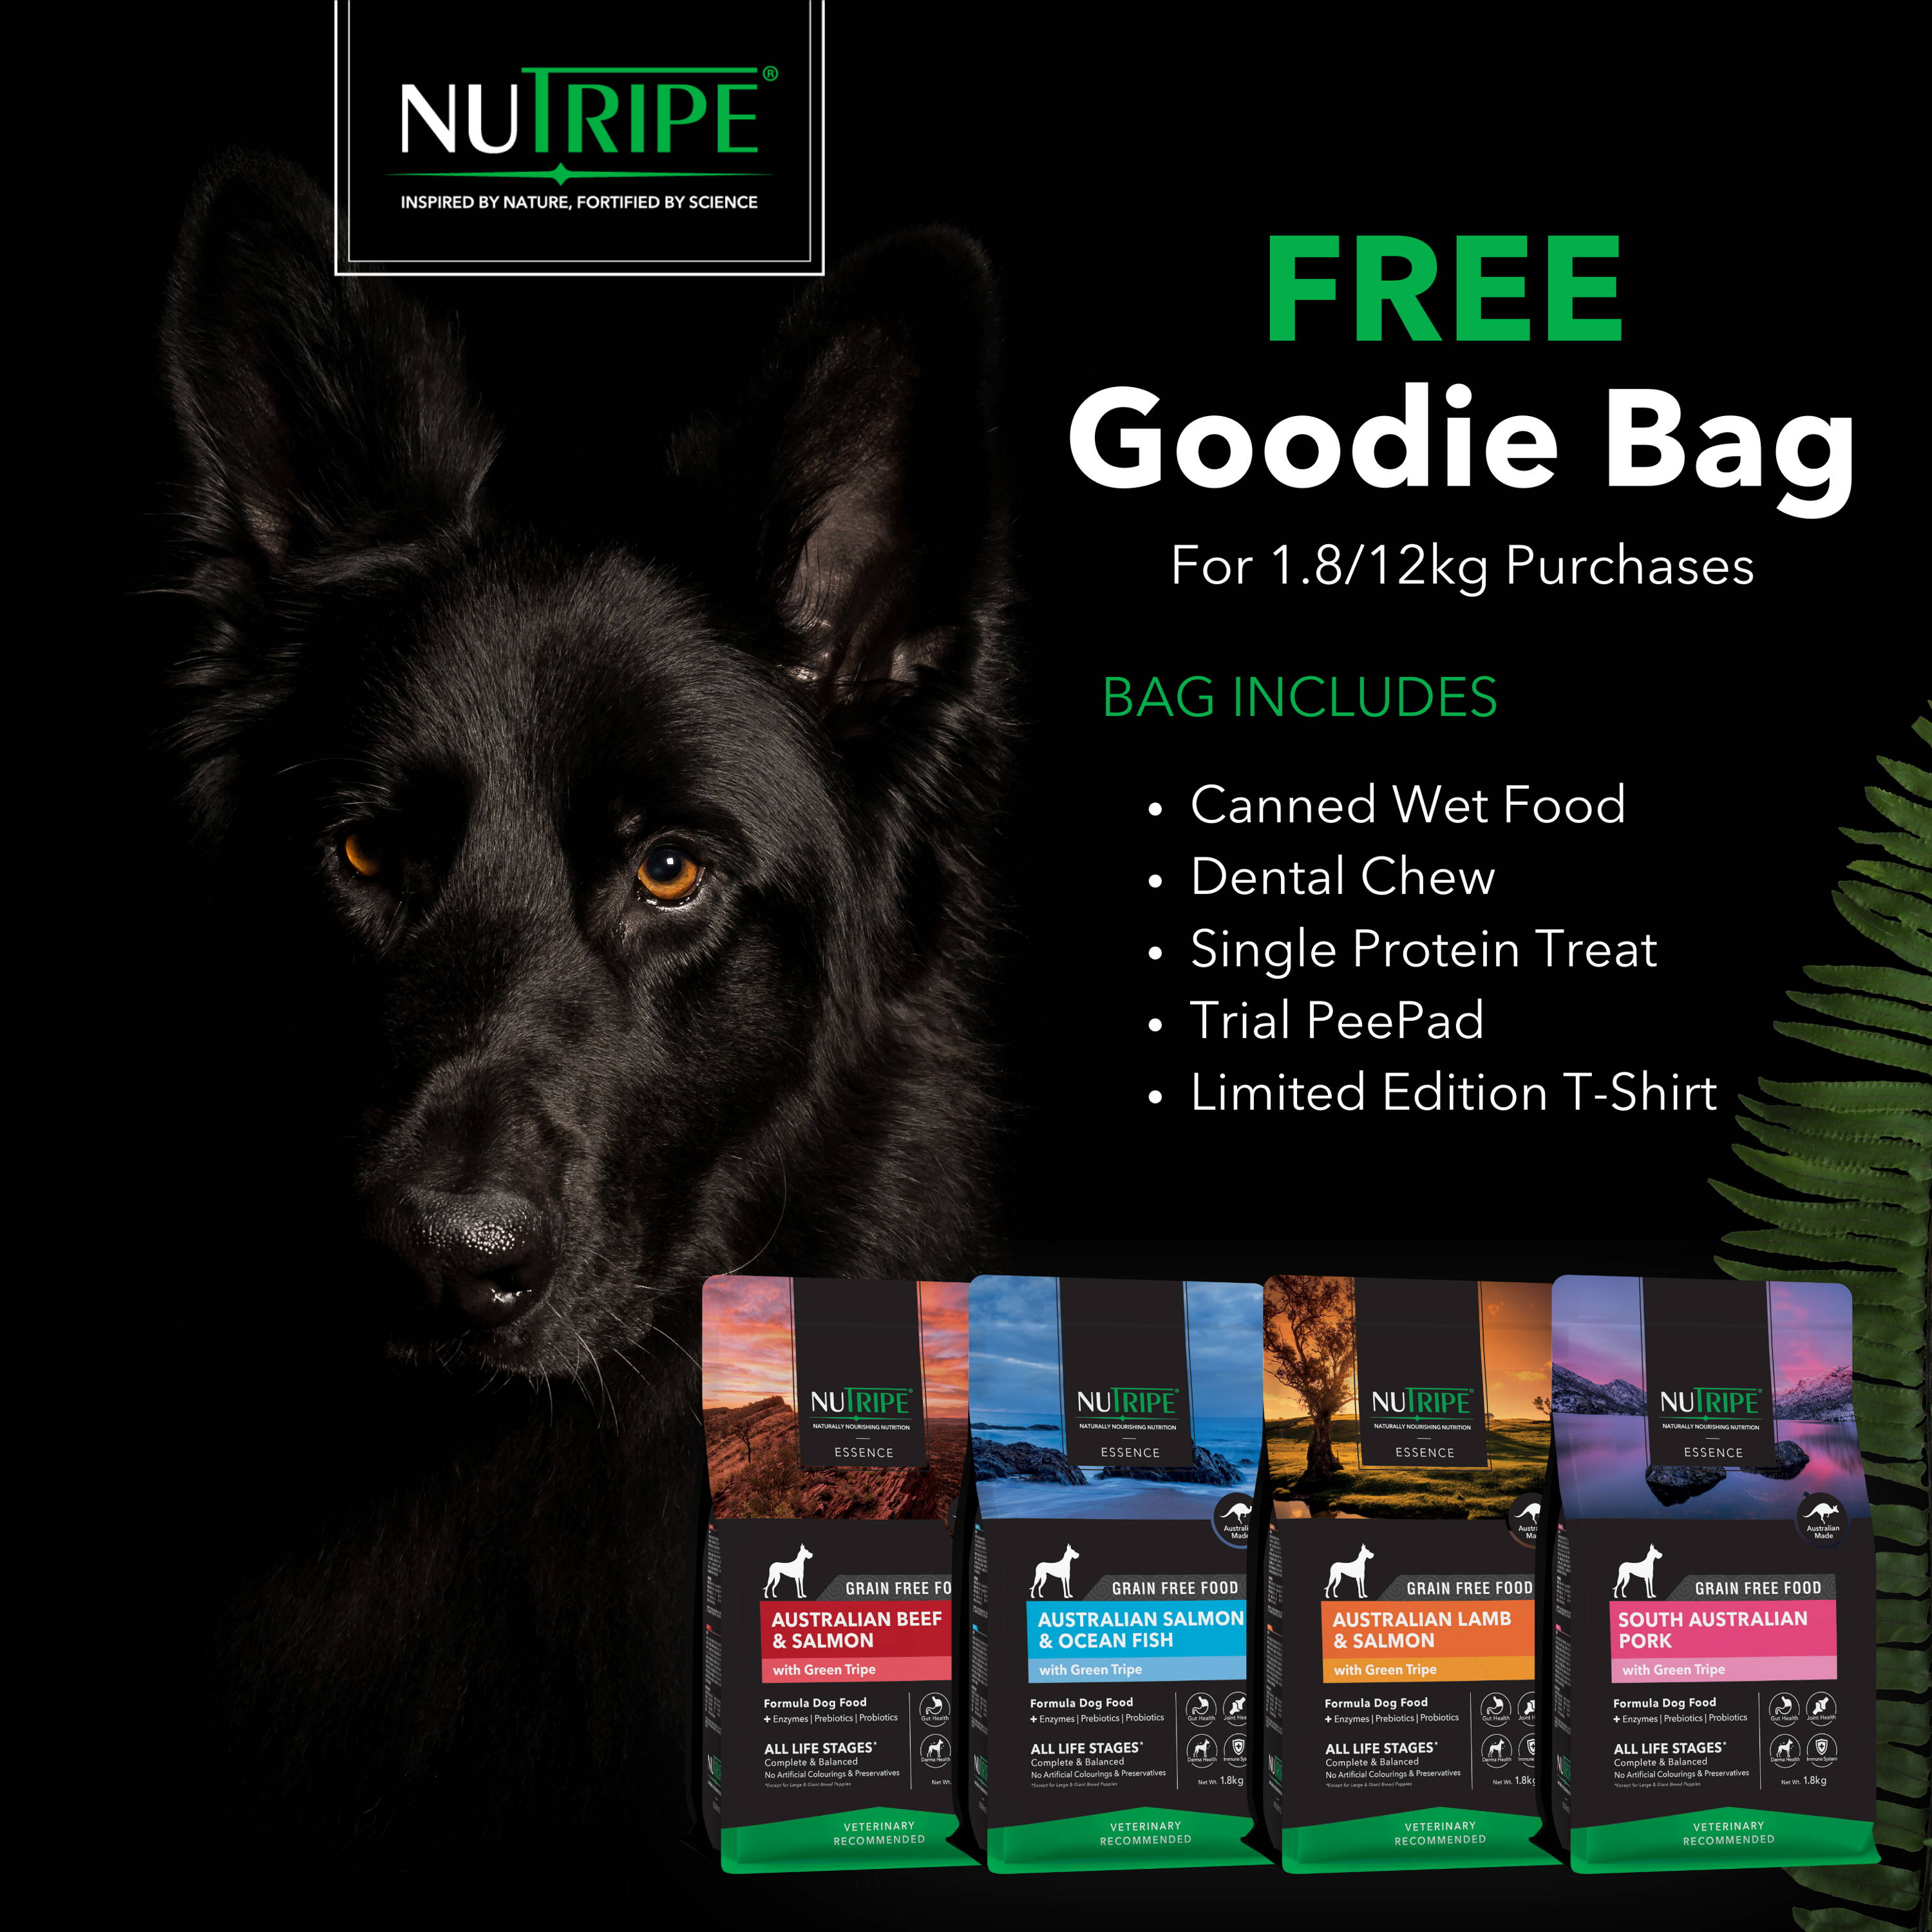 Nutripe Essence Dog Food with free goodie bag for evvery 1.8kg or 12kg bag purchase.